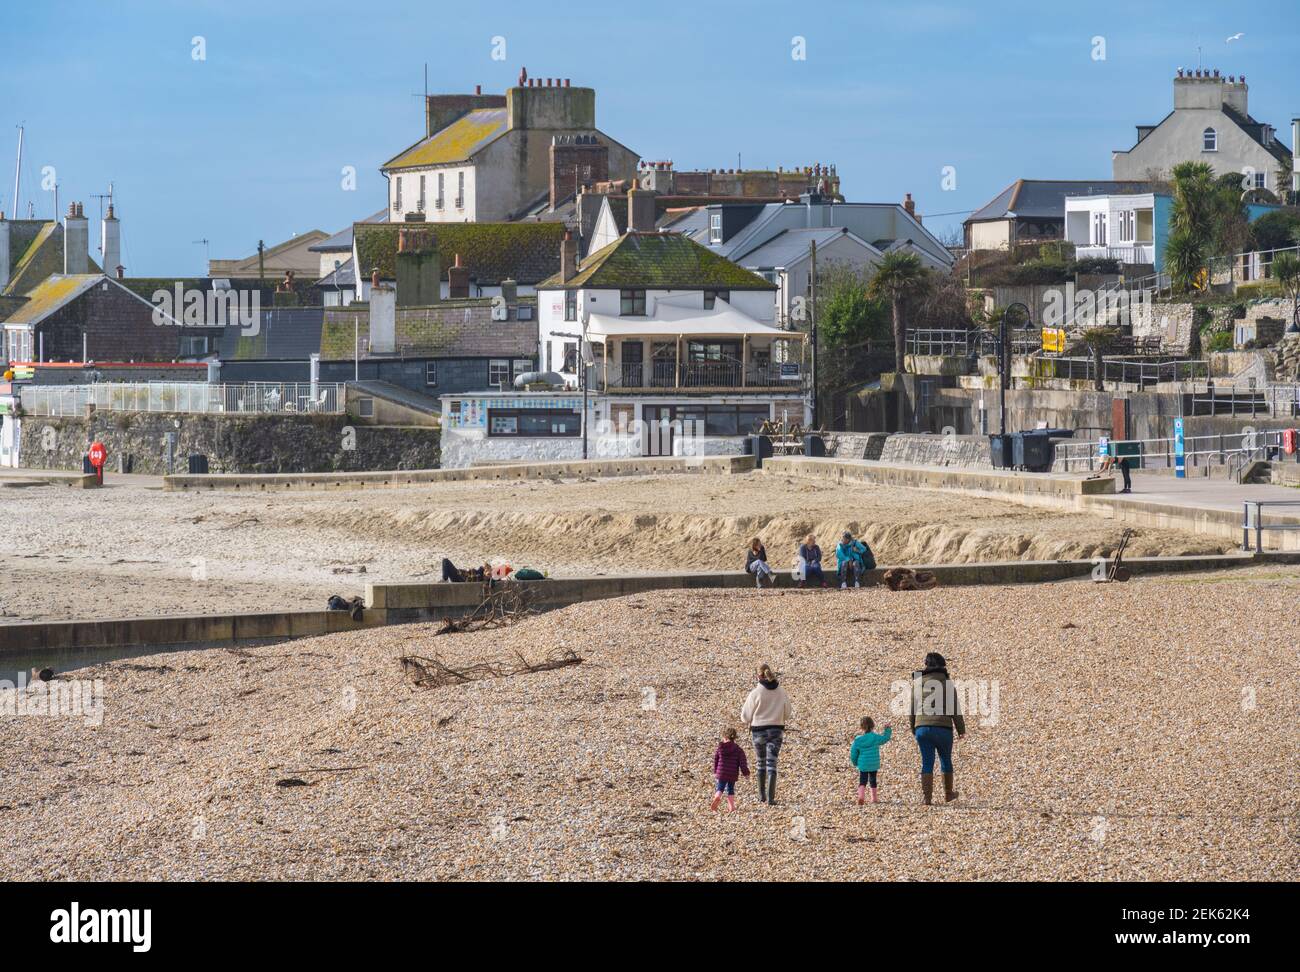 Lyme Regis, Dorset, UK. 23rd Feb, 2021. UK Weather: Locals enjoy the spring sunshine and bright blue skies on a breezy morning at Lyme Regis. Businesses in the town are looking forward to the gradual lifting of the lockdown in time for the summer season. Credit: Celia McMahon/Alamy Live News Stock Photo